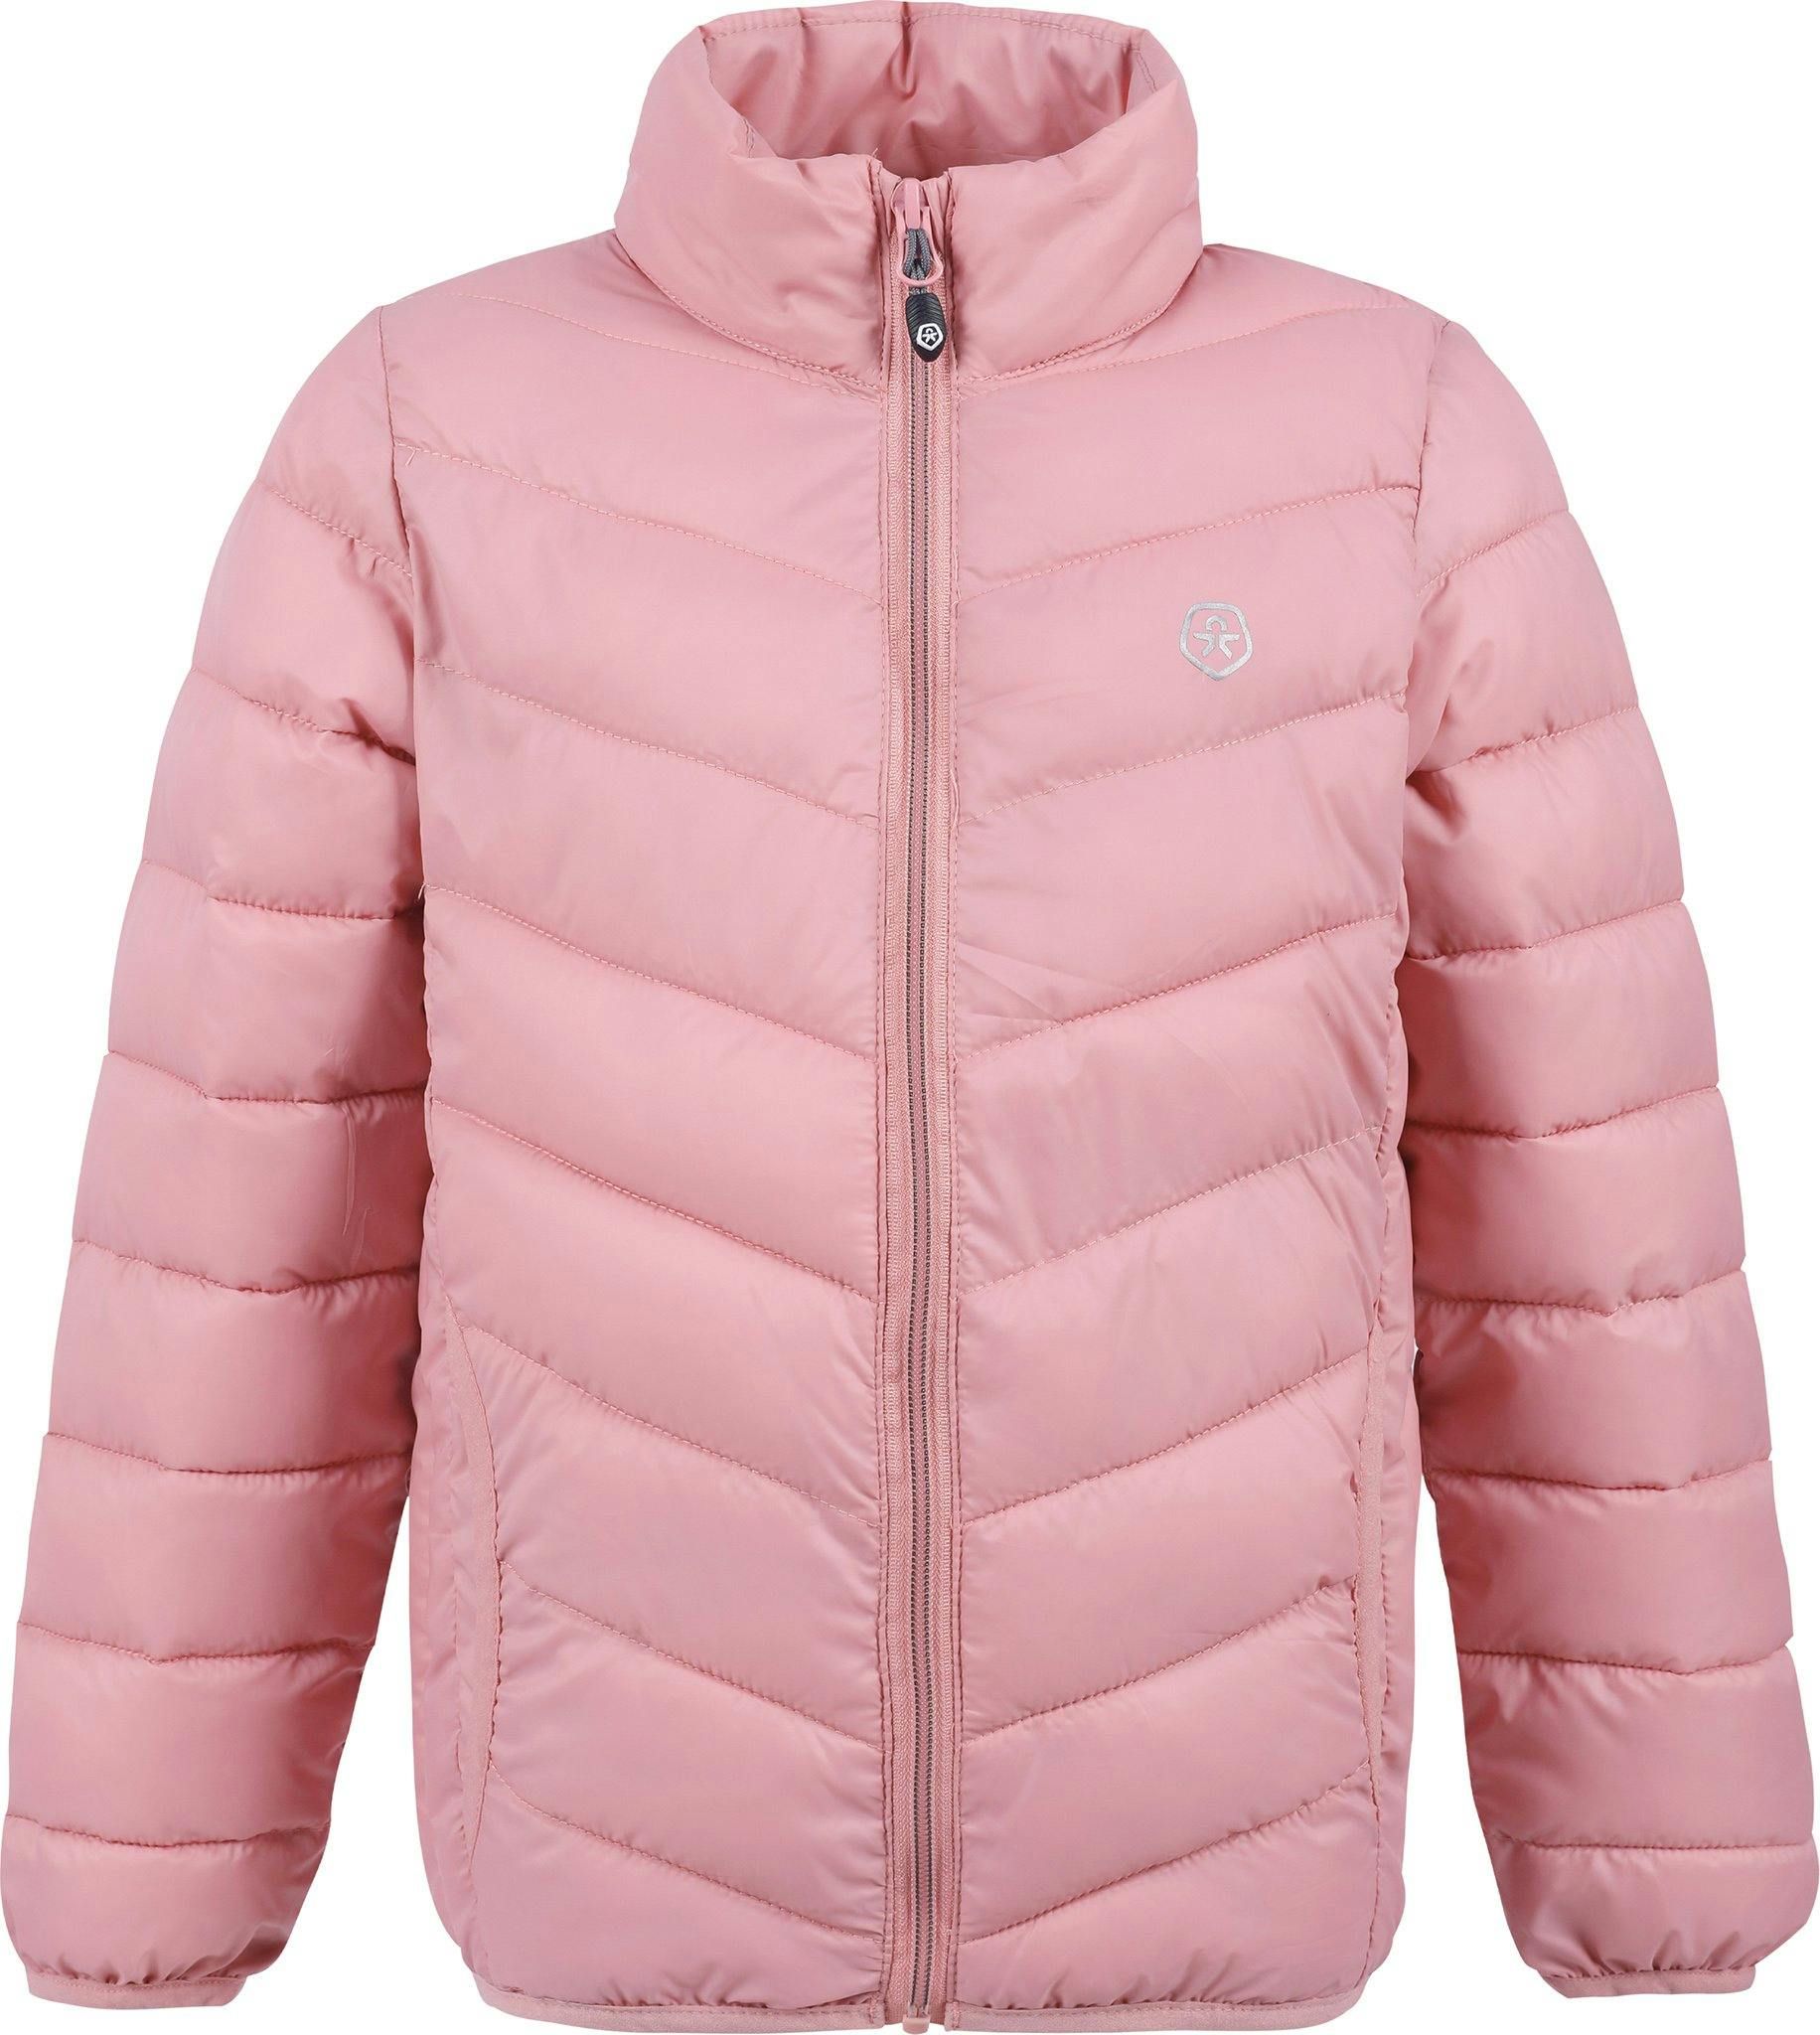 Product image for Packable Quilted Jacket - Kids